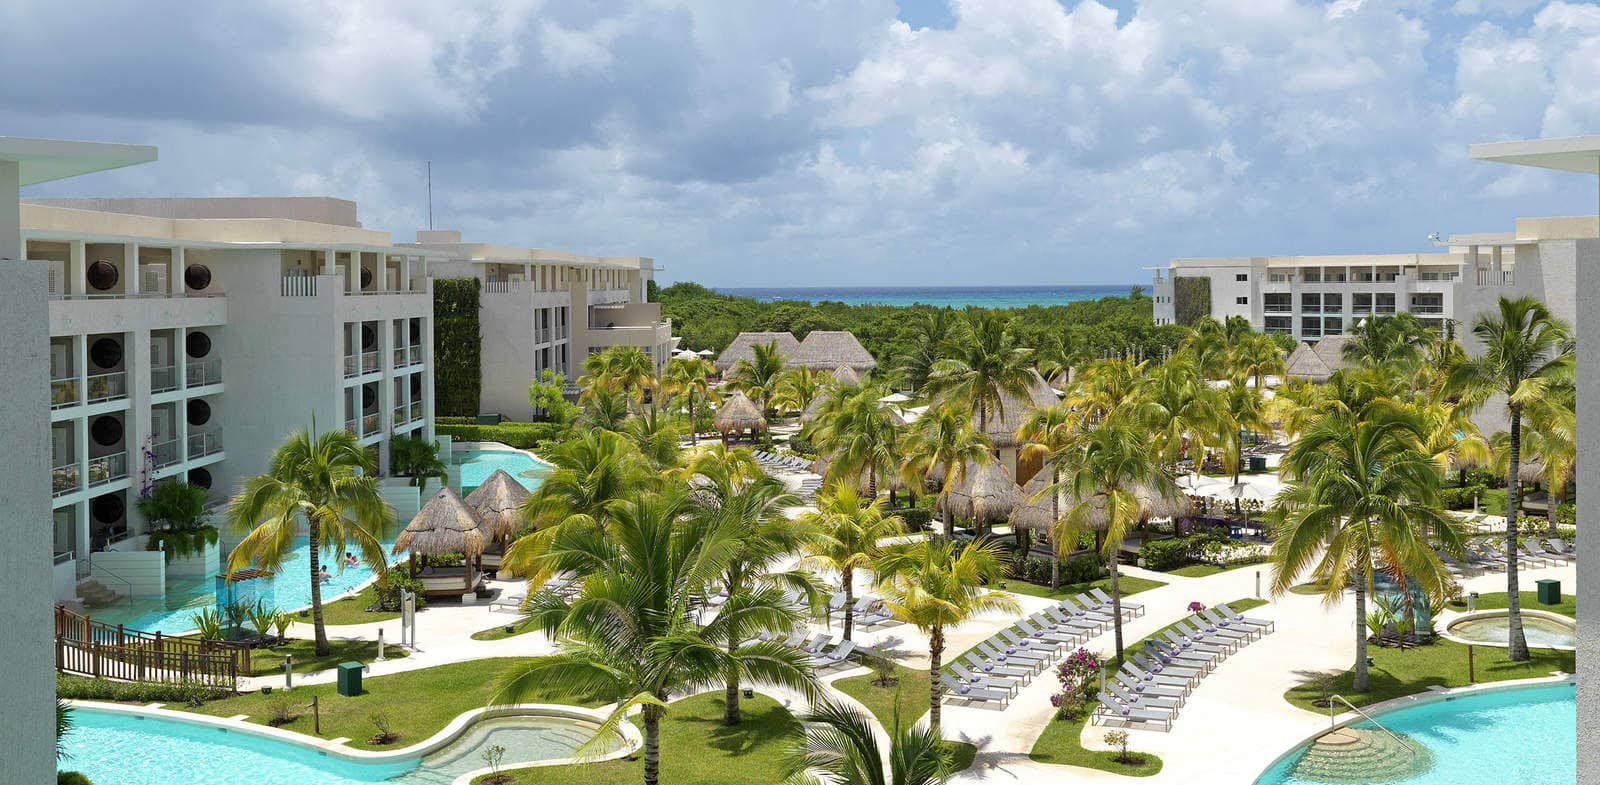 An aerial view of the hotel buildings and grounds at Paradisus Playa del Carmen, featuring several pools and many palm trees.